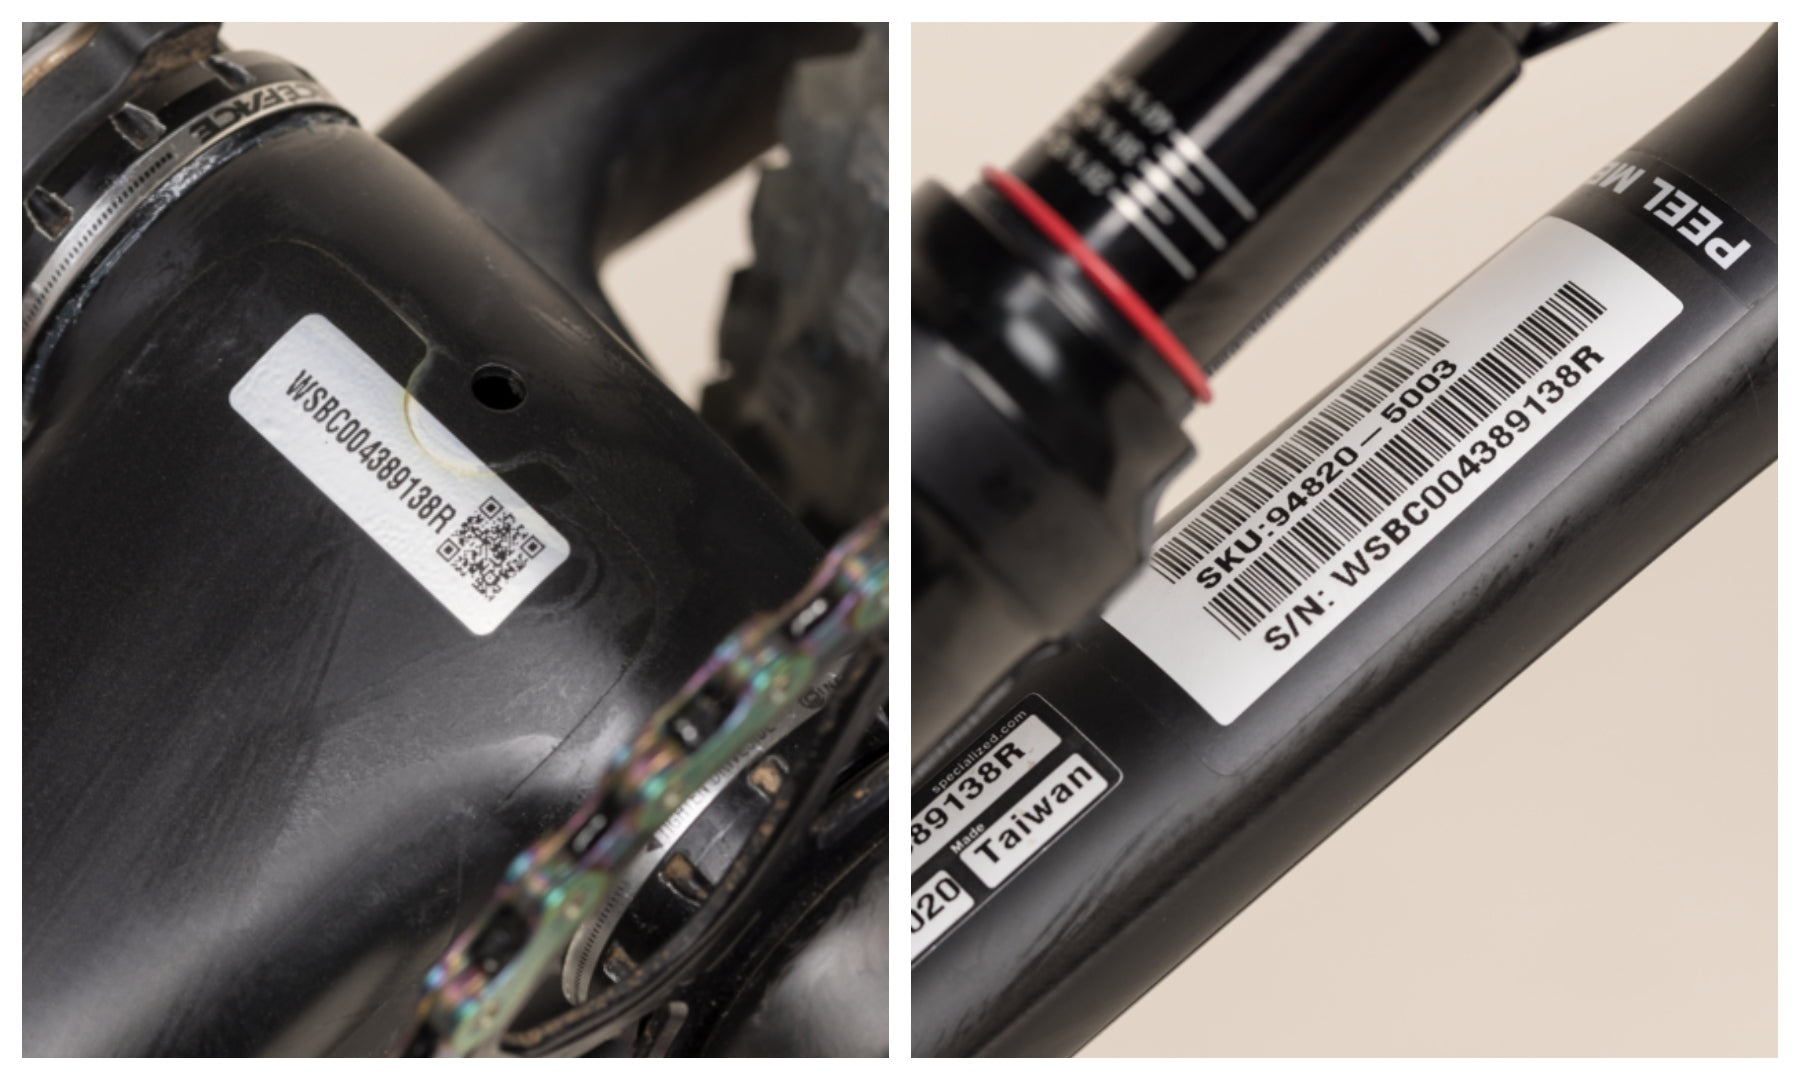 How To Find Your Bike's Serial Number